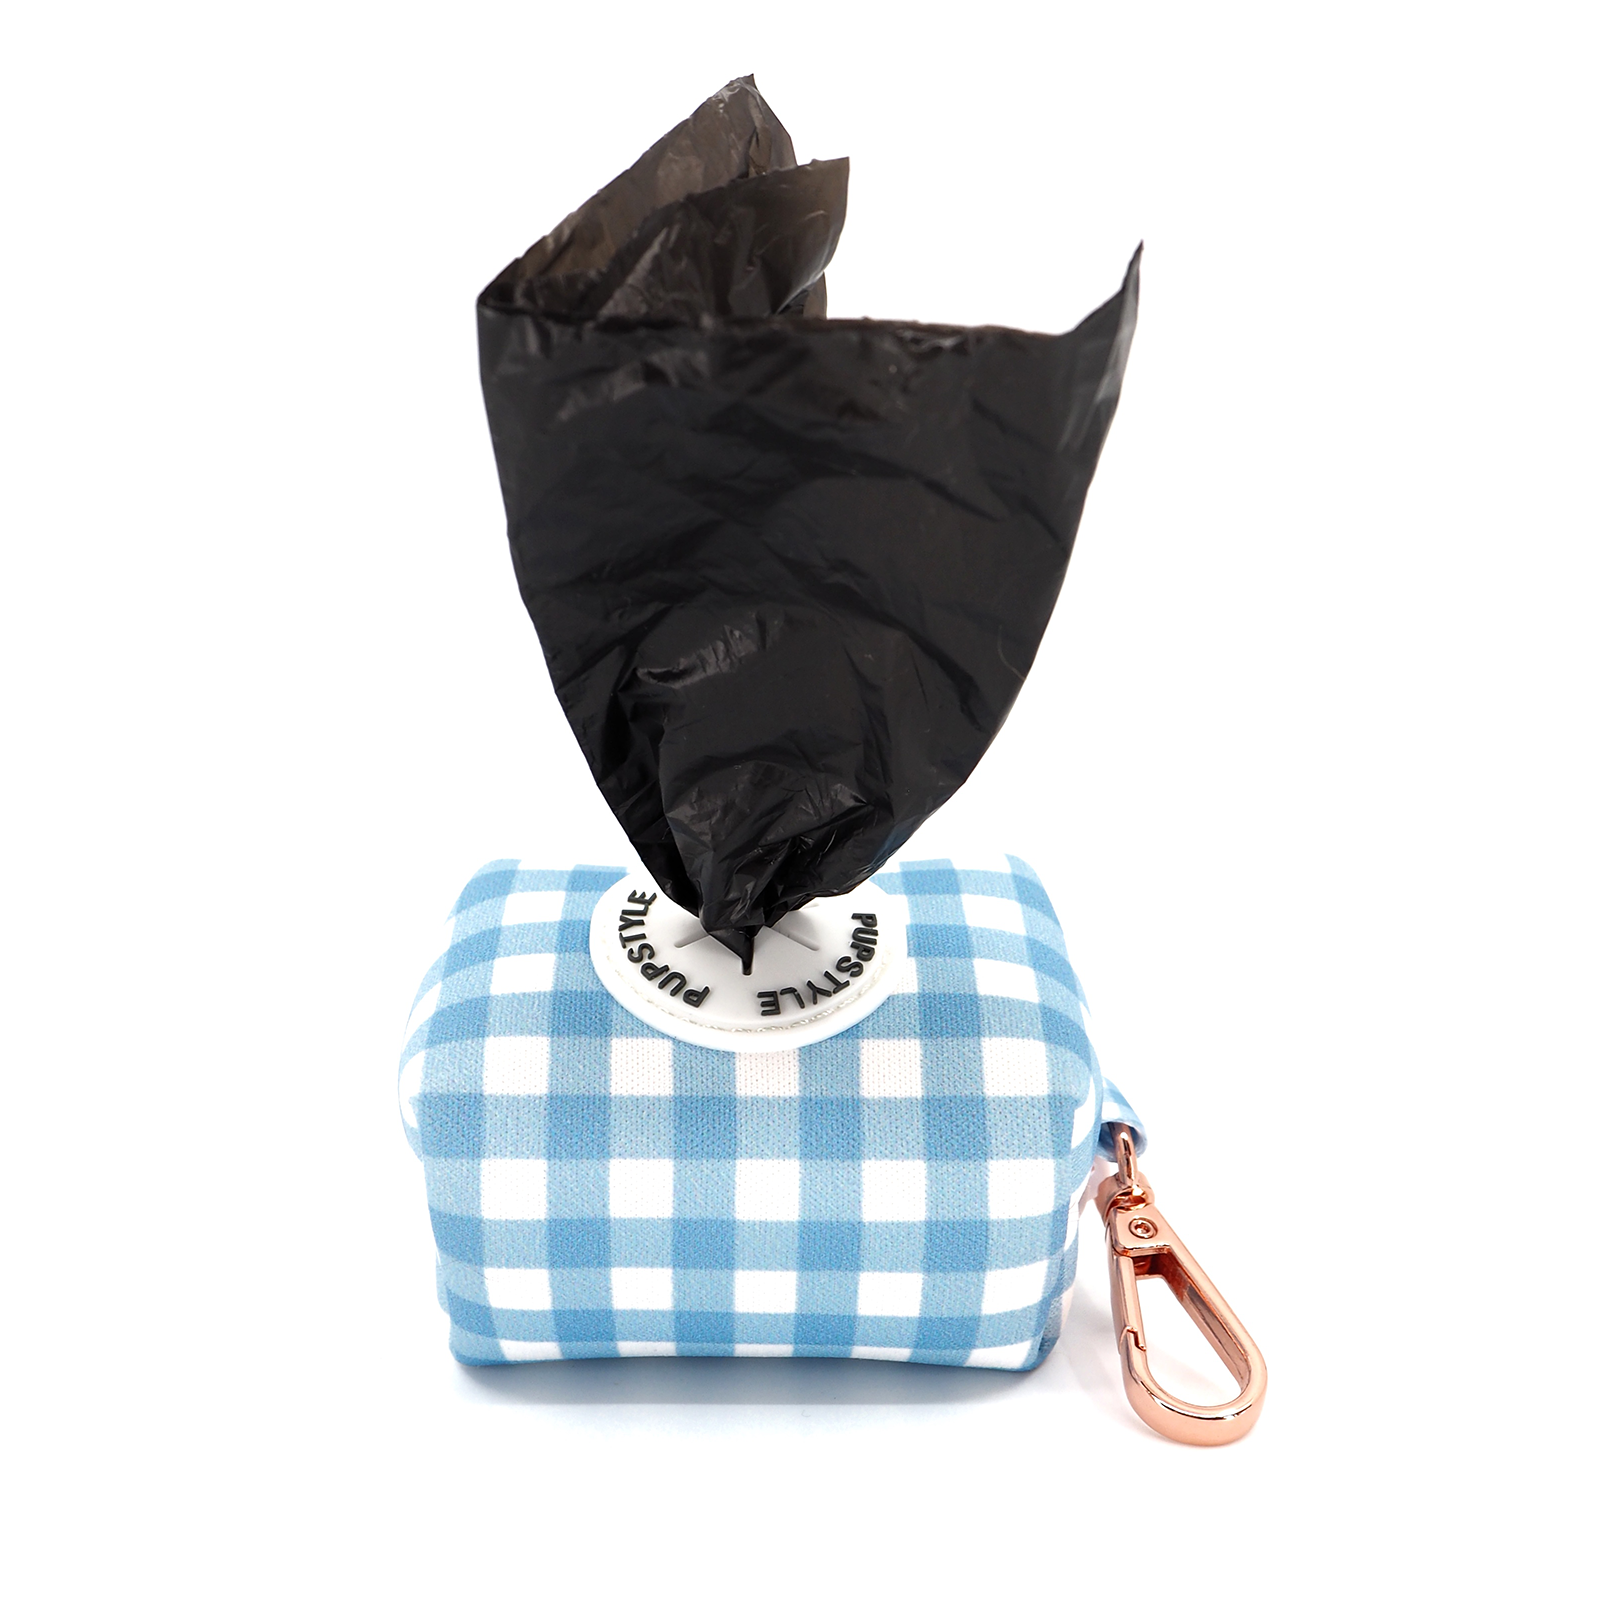 Pupstyle Dog Poop Bag Holder Blueberry Muffin